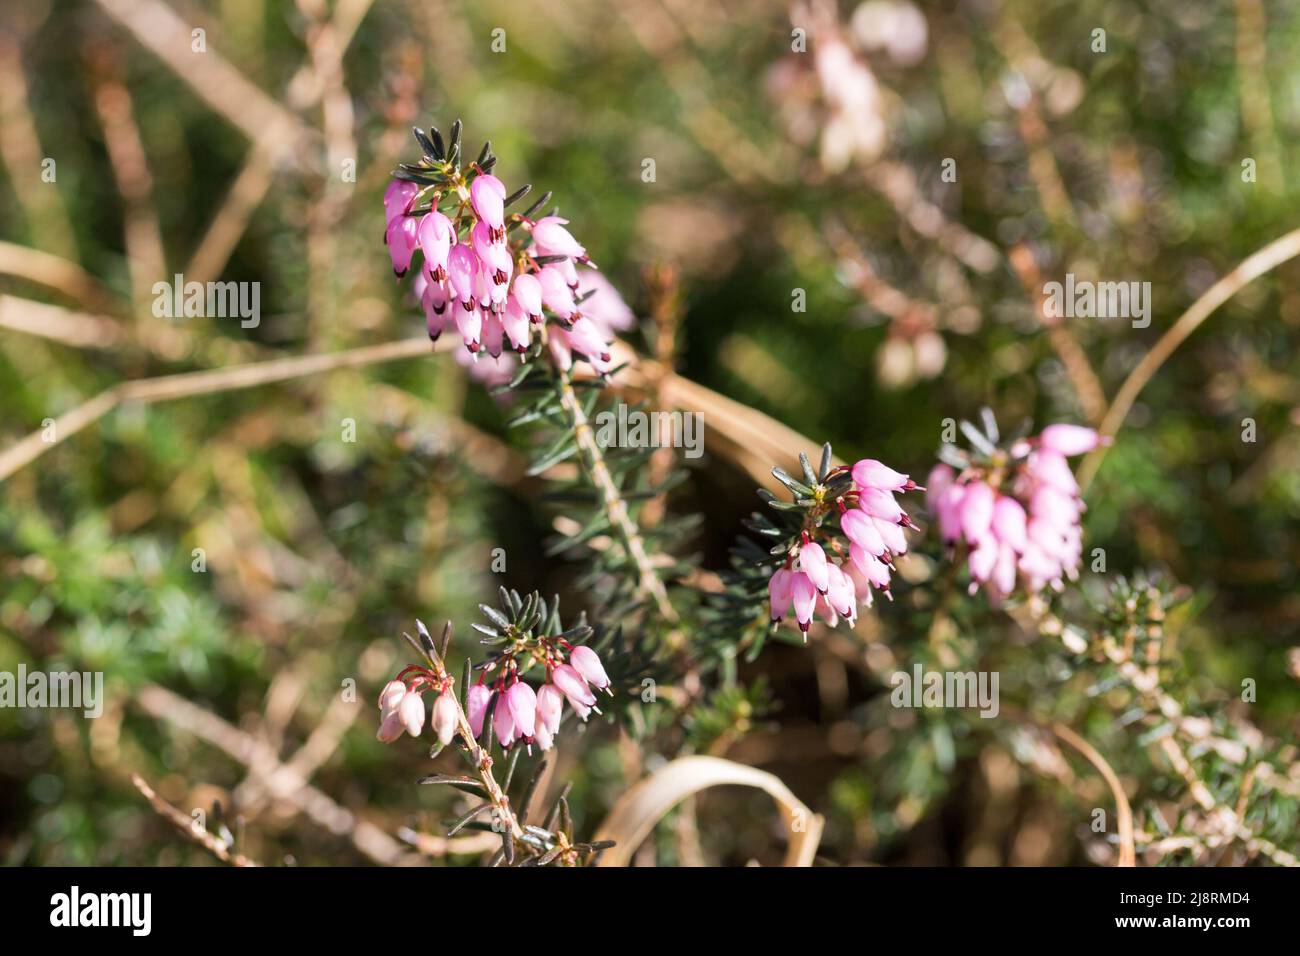 View on a pink Erica multiflora flower. Stock Photo